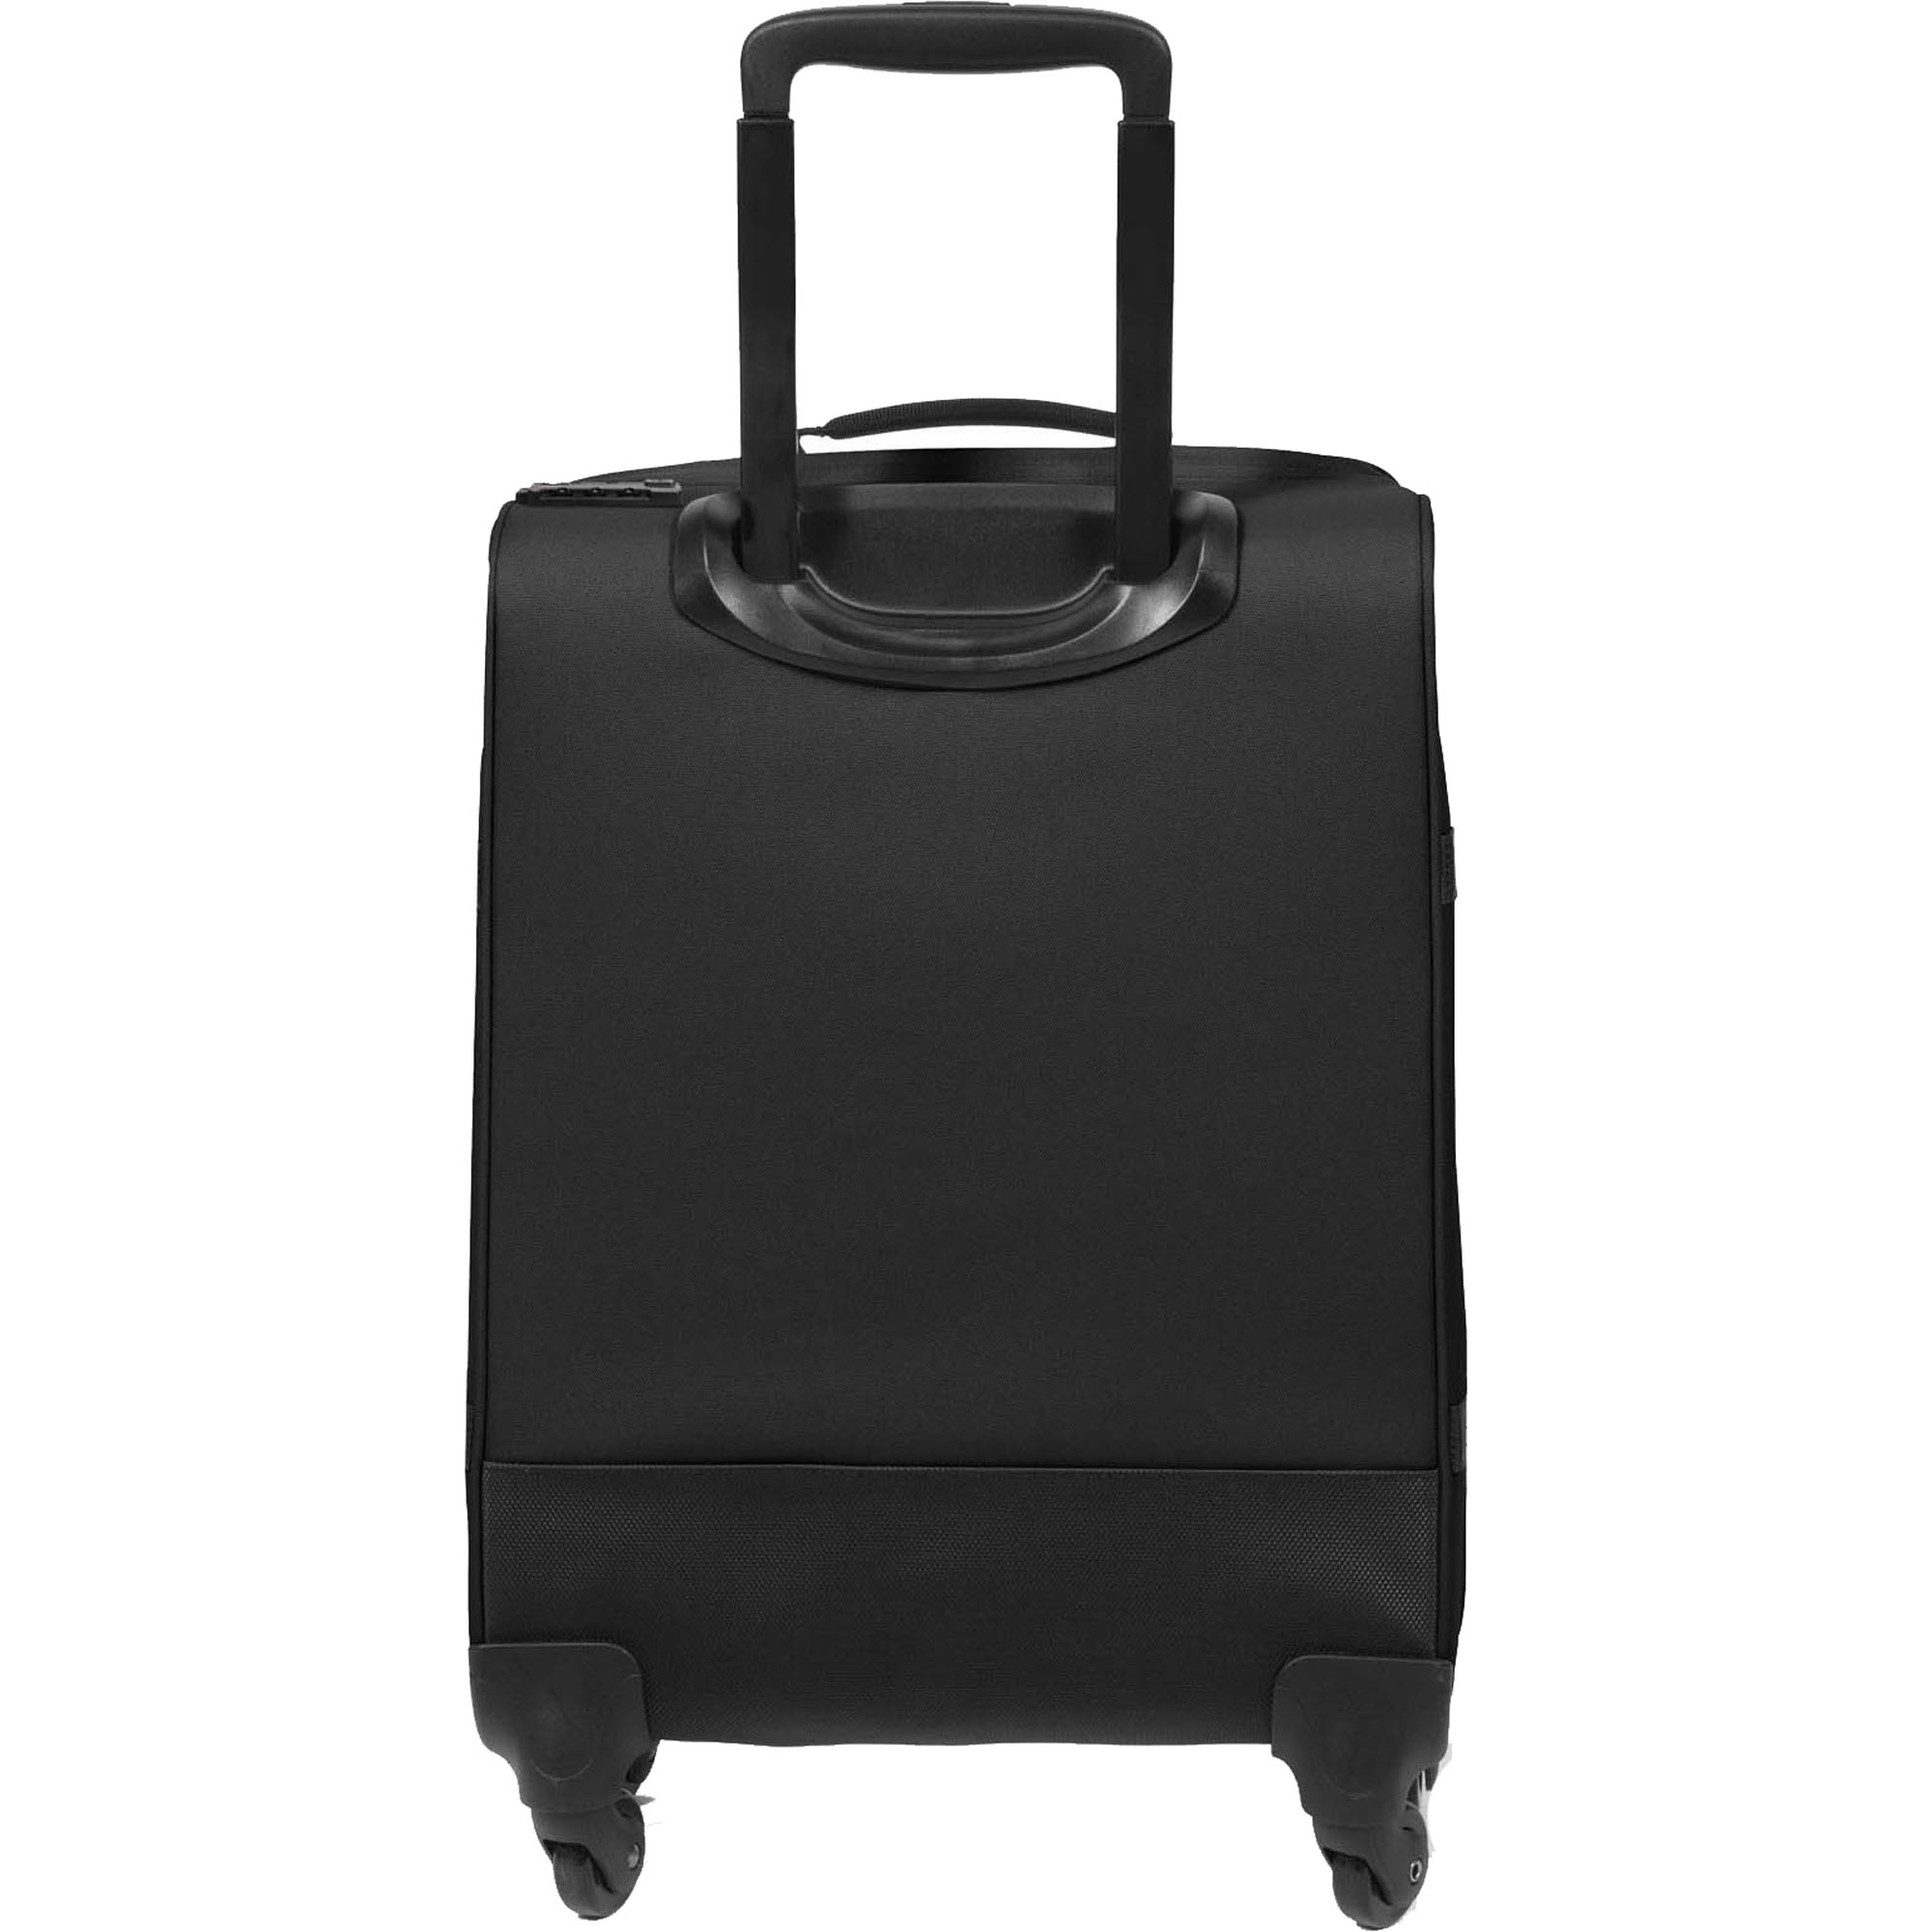 Eastpak Trans4 S 44 Litres Wheeled Luggage